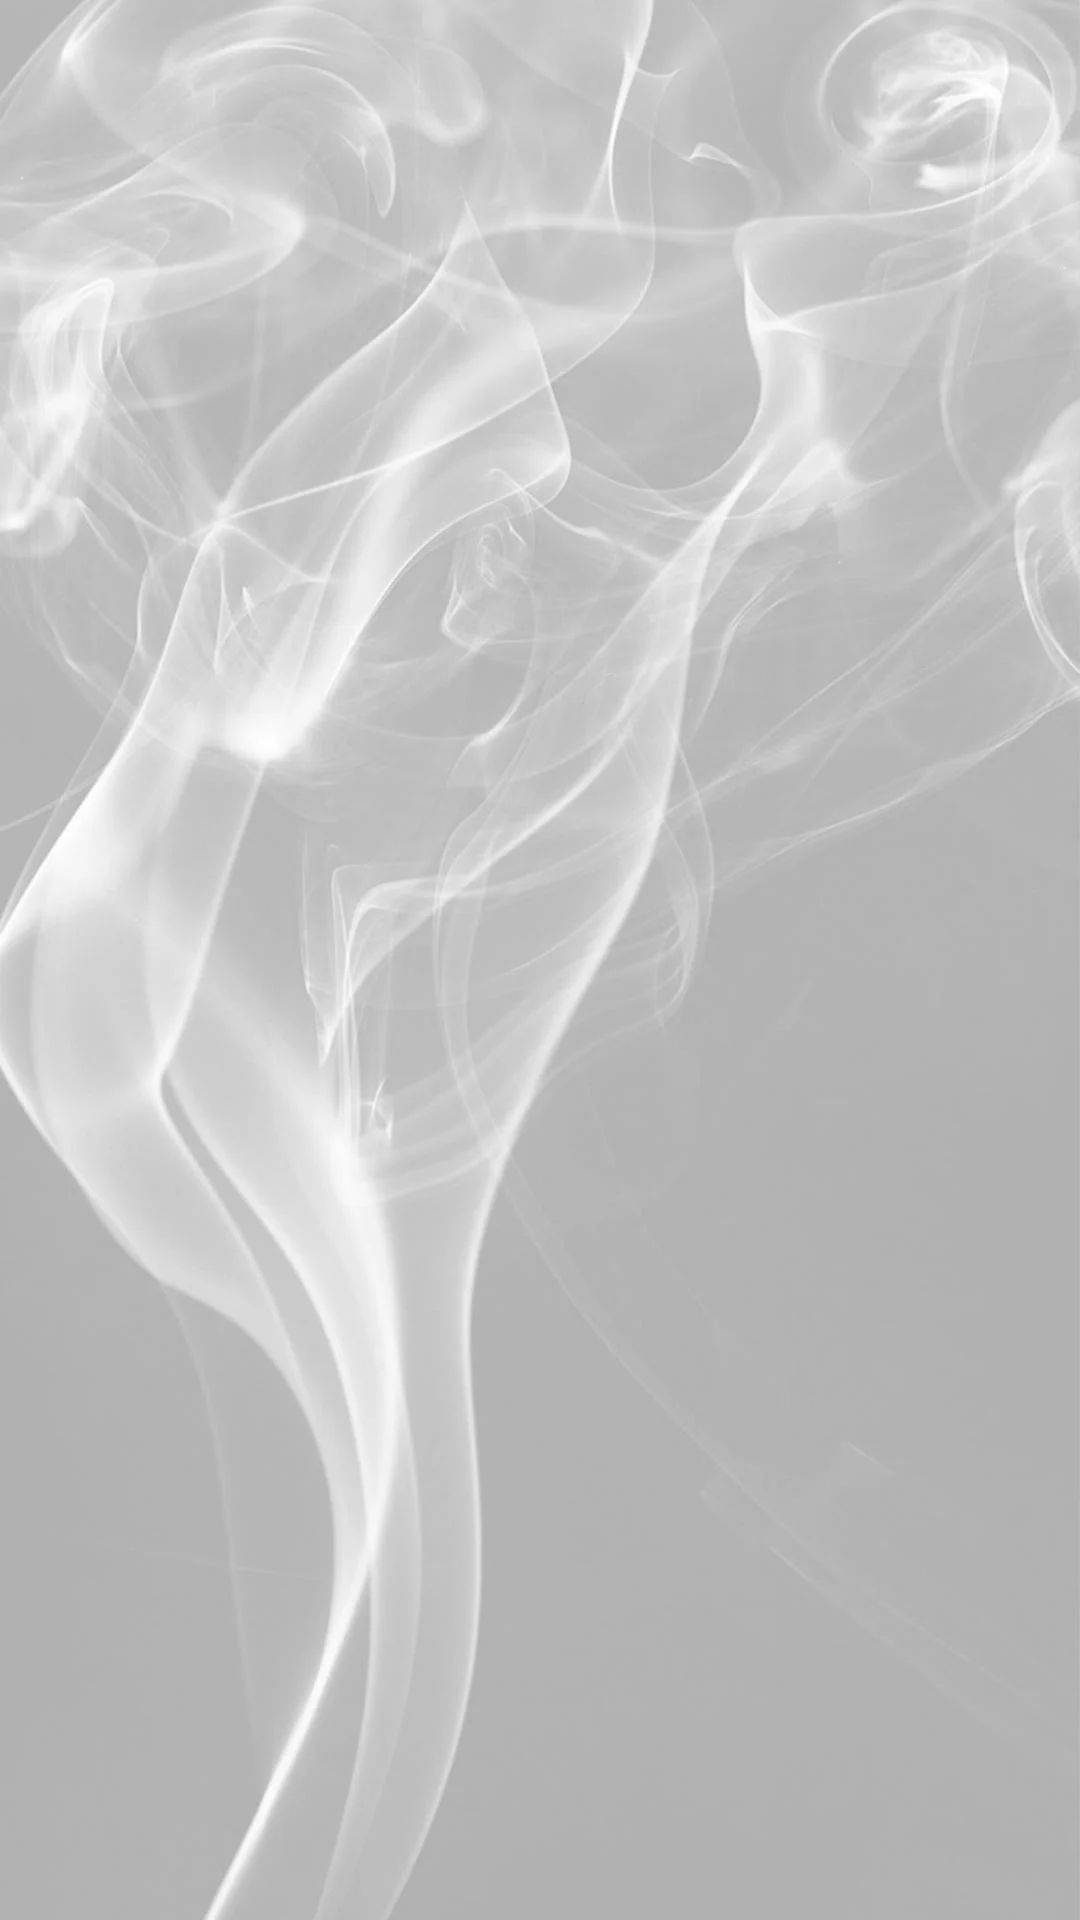 Aesthetic White Smoke Picture